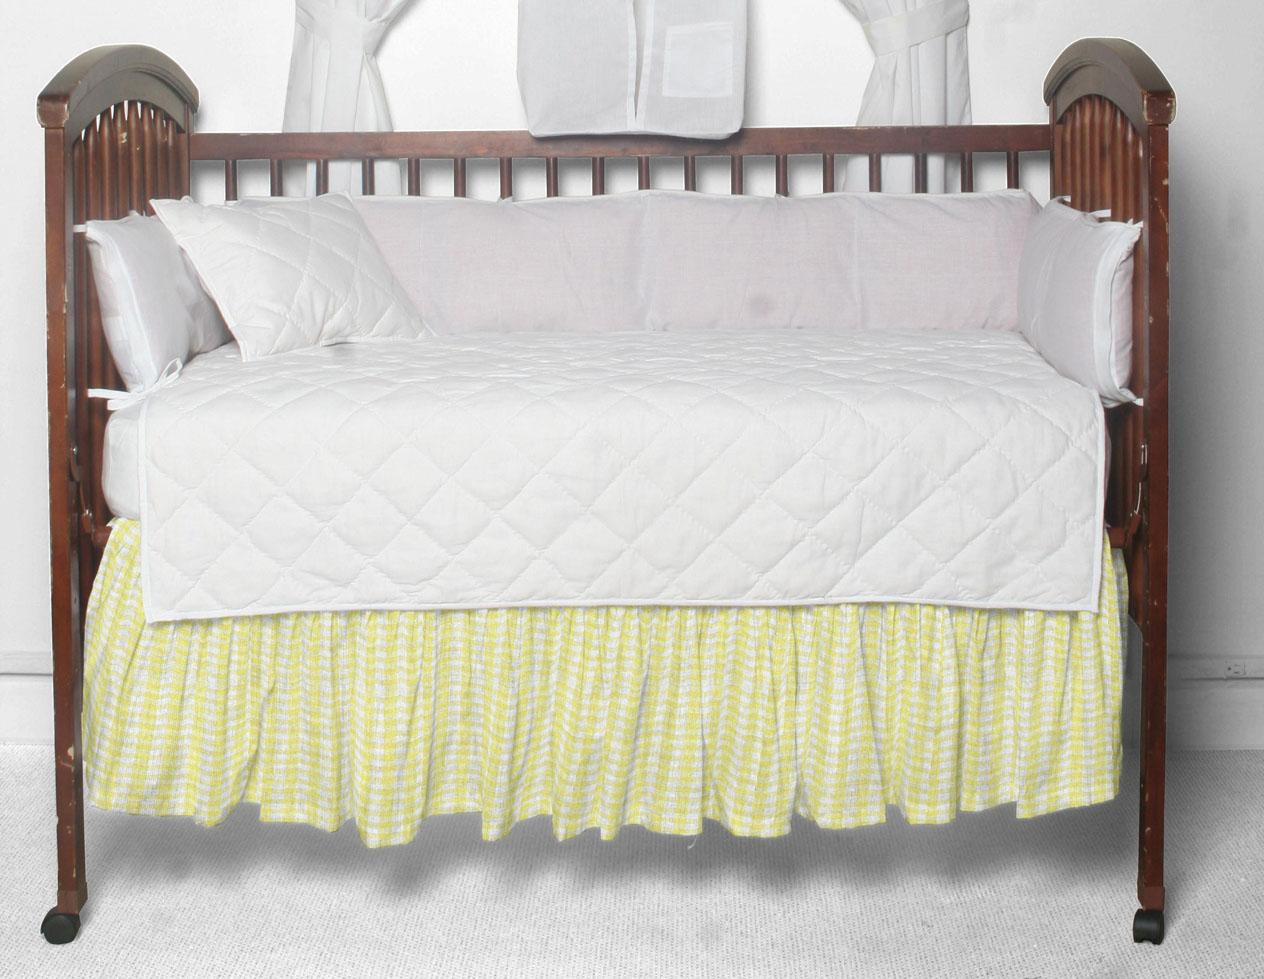 Pale yellow & white gingham check Crib Bed Skirt 28" x 53"-Drop-13"